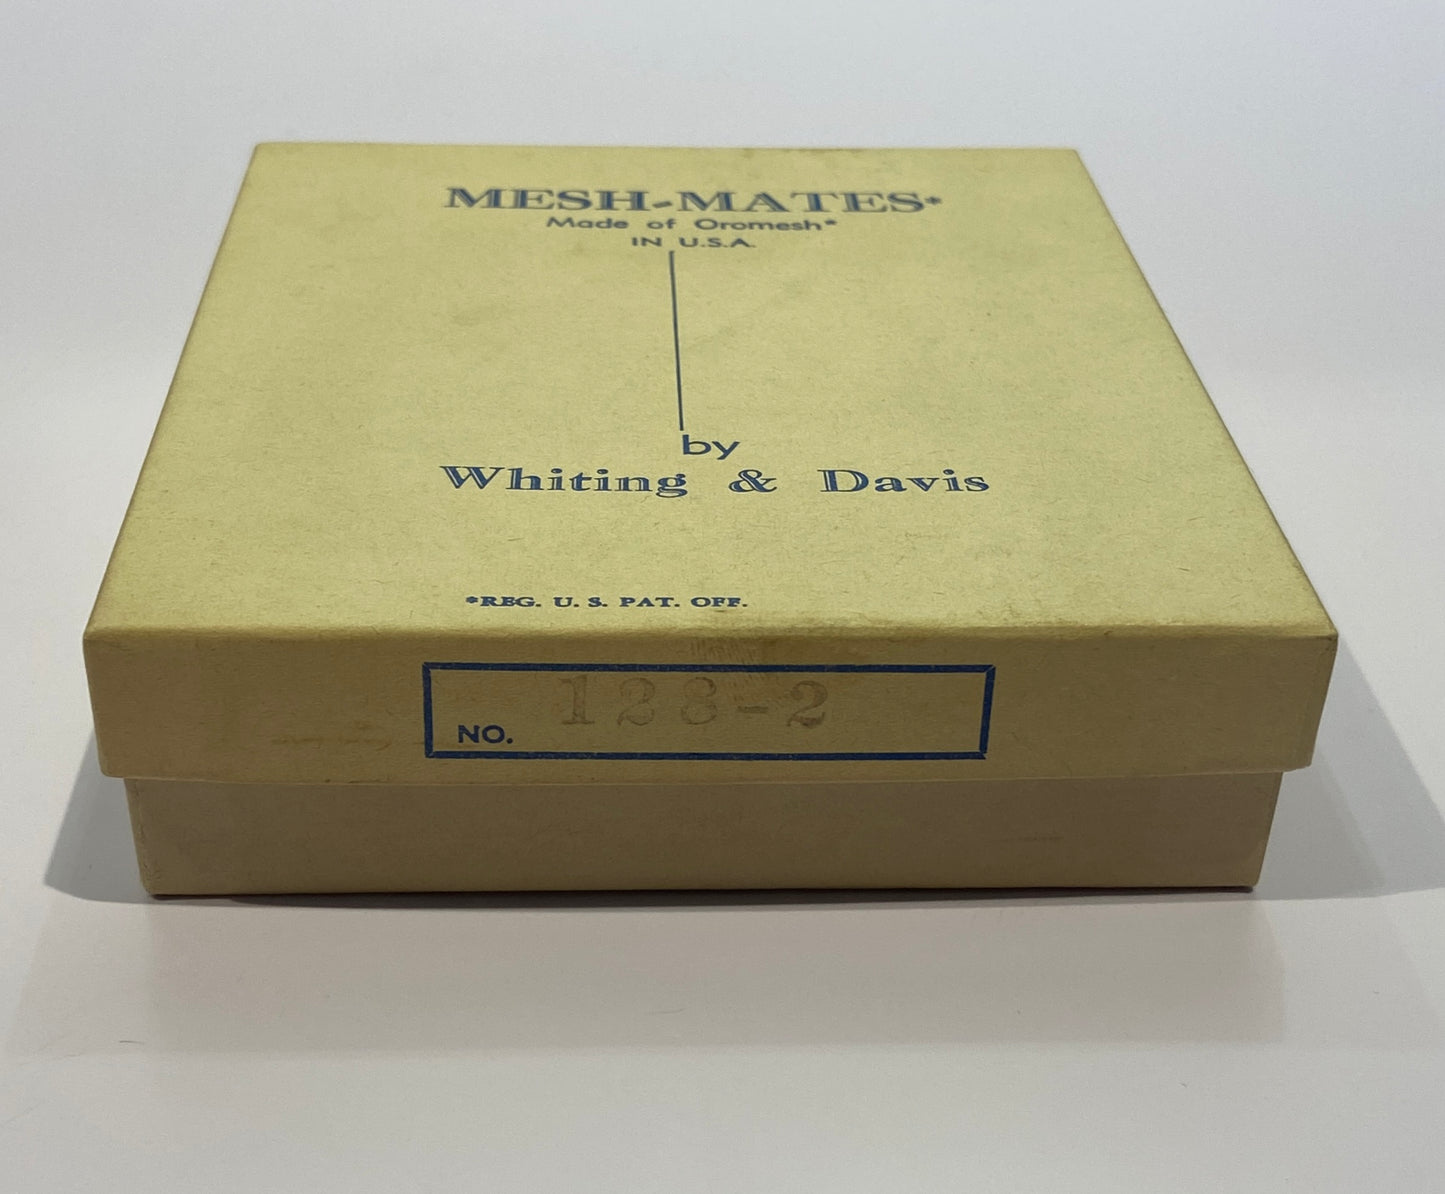 Vintage Whiting & Devis White Mesh Coin Purse with Original Box